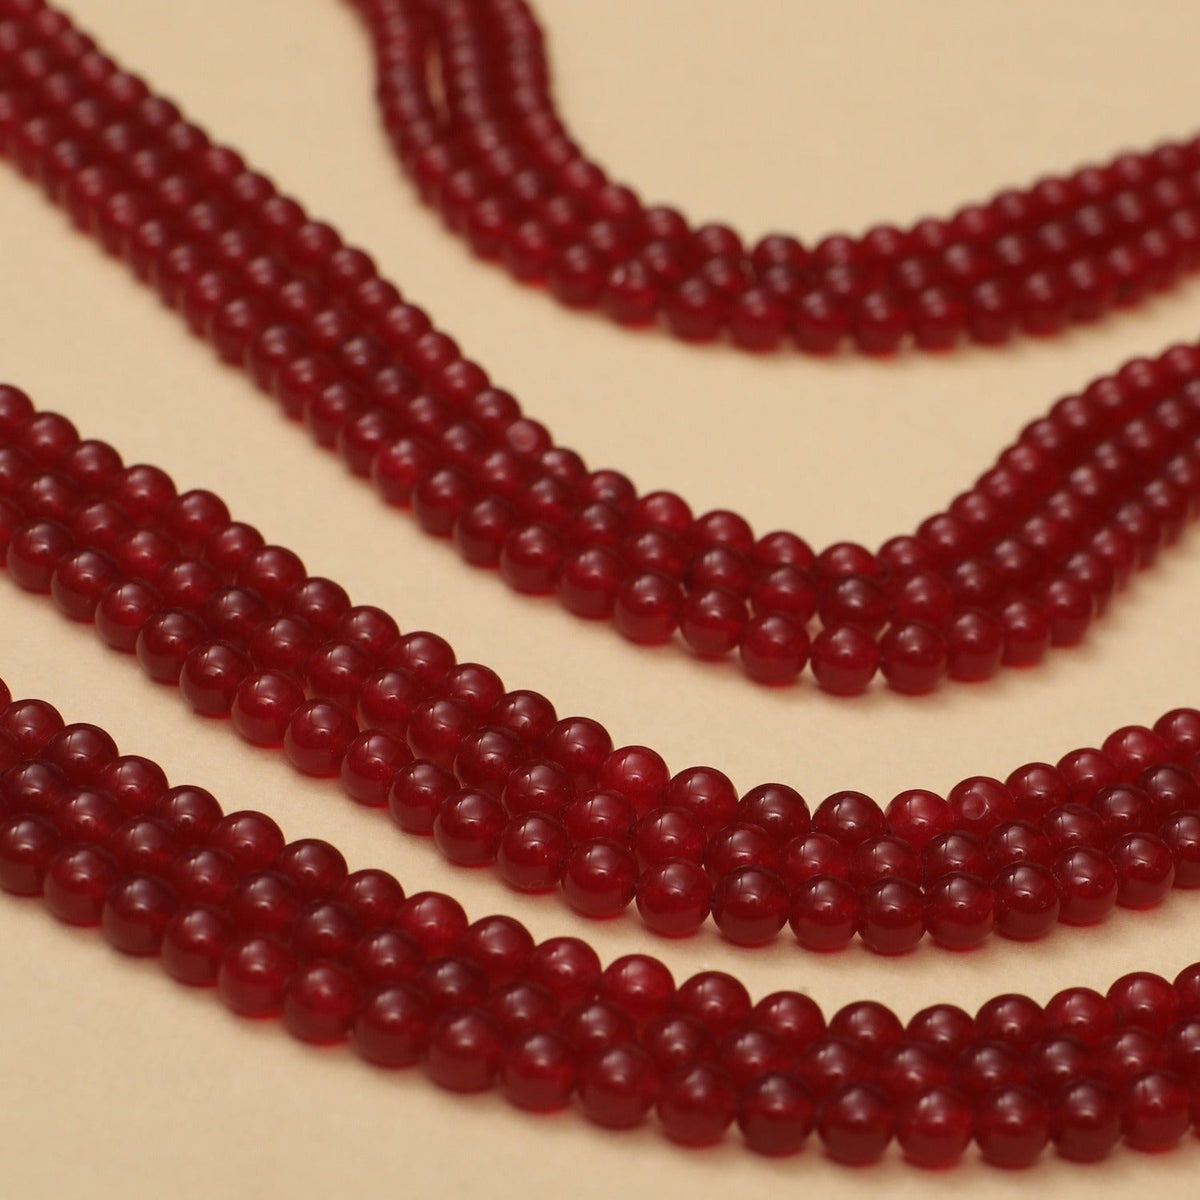 Red Jade Dyed Quartz 8mm Beads- Sold Per Strand